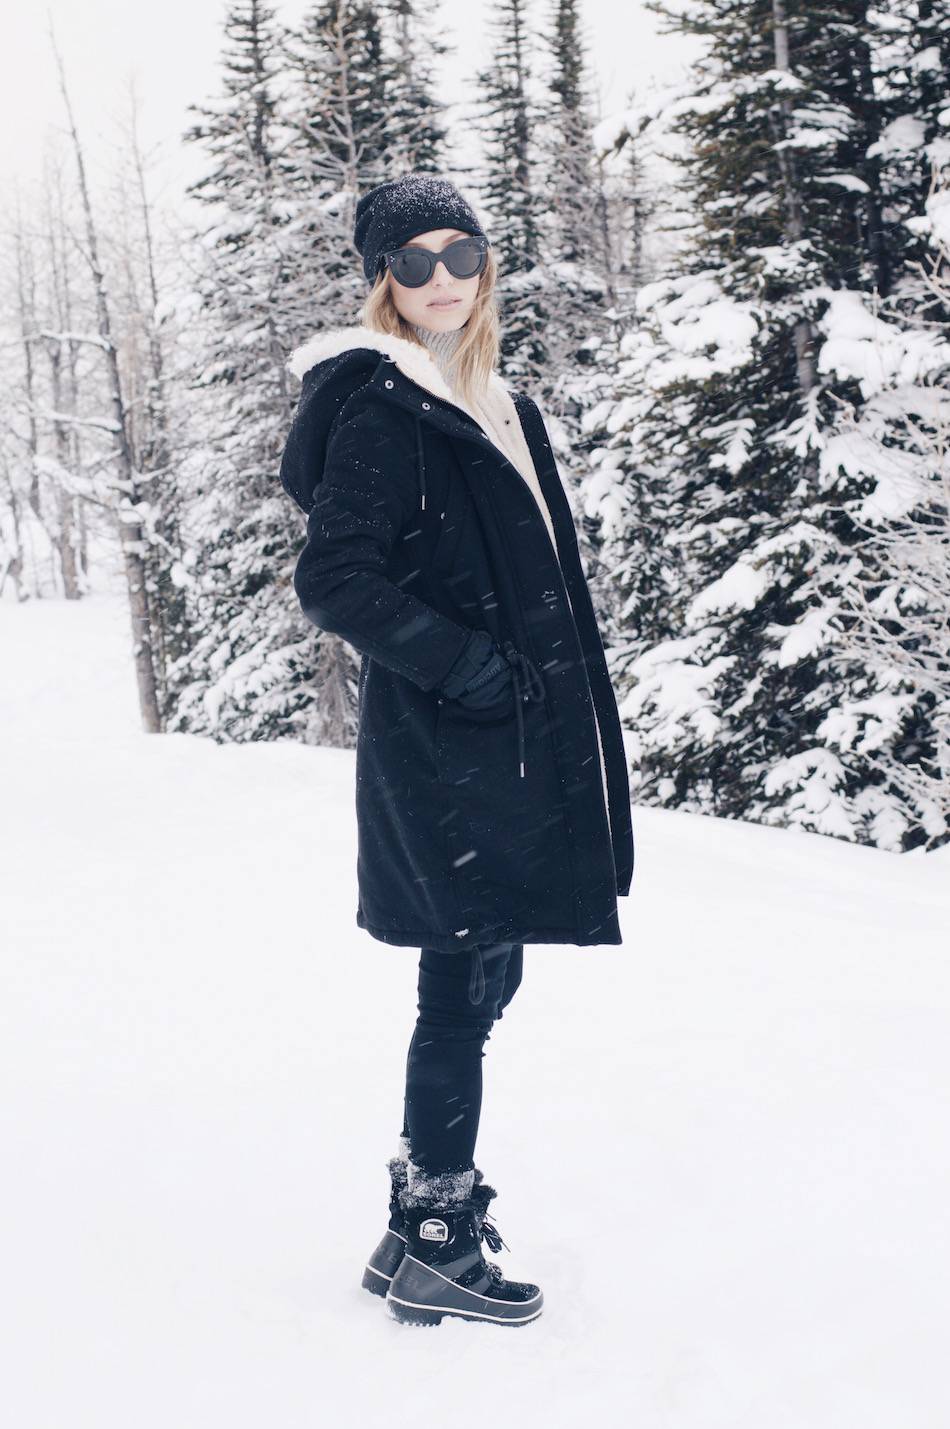 4 tips for looking good in the snow